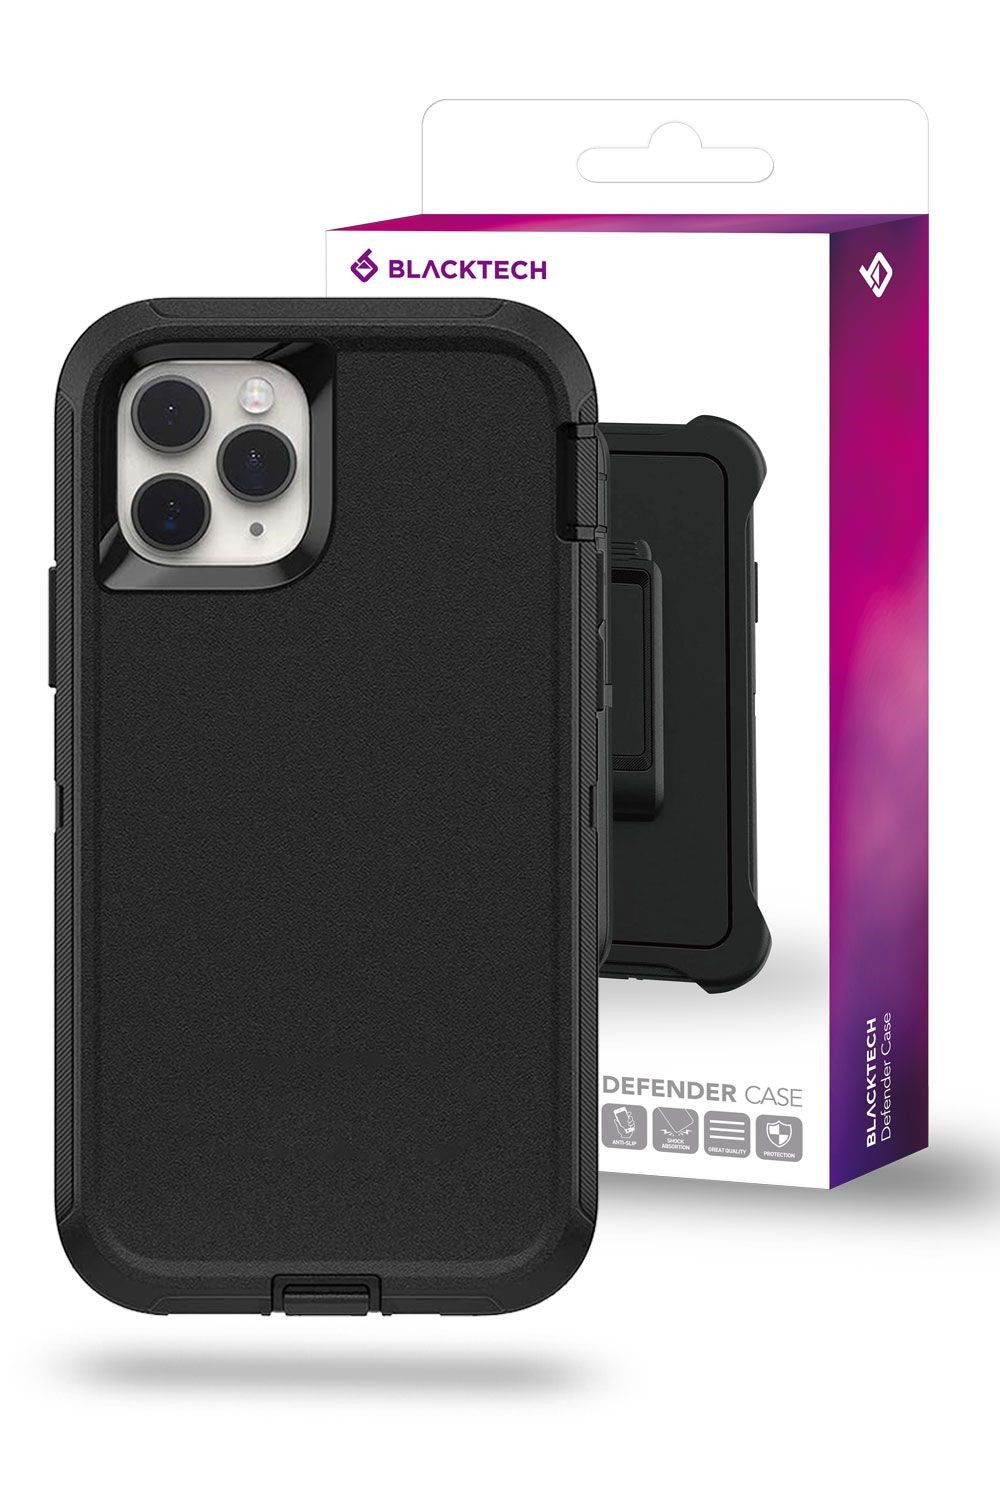 Blacktech iPhone 11 Pro Max Defender Heavy Duty Shockproof Case